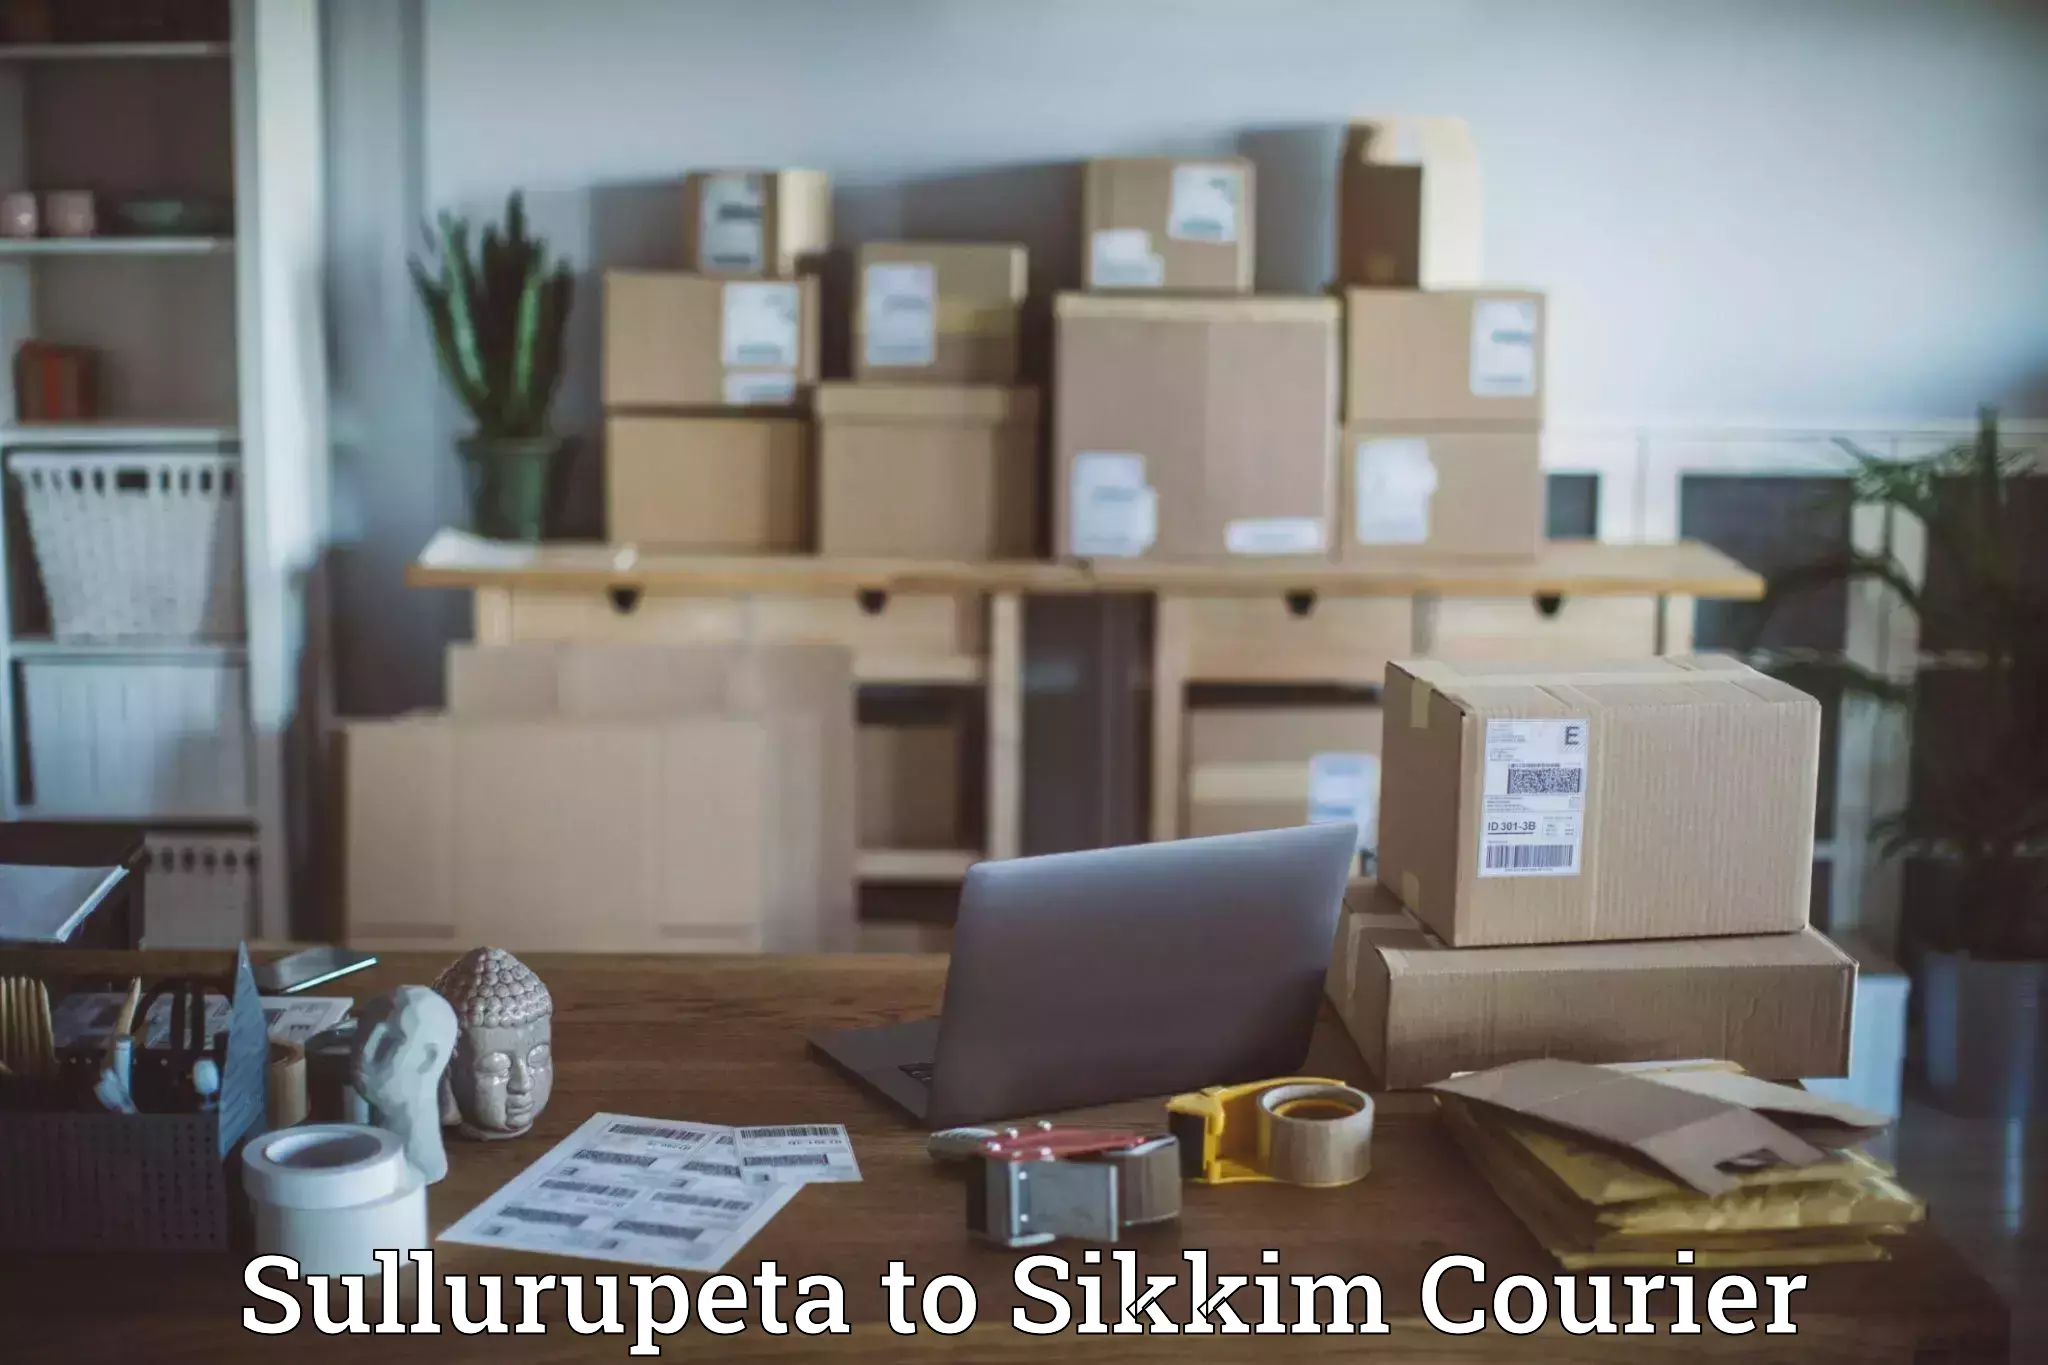 Round-the-clock parcel delivery Sullurupeta to Mangan